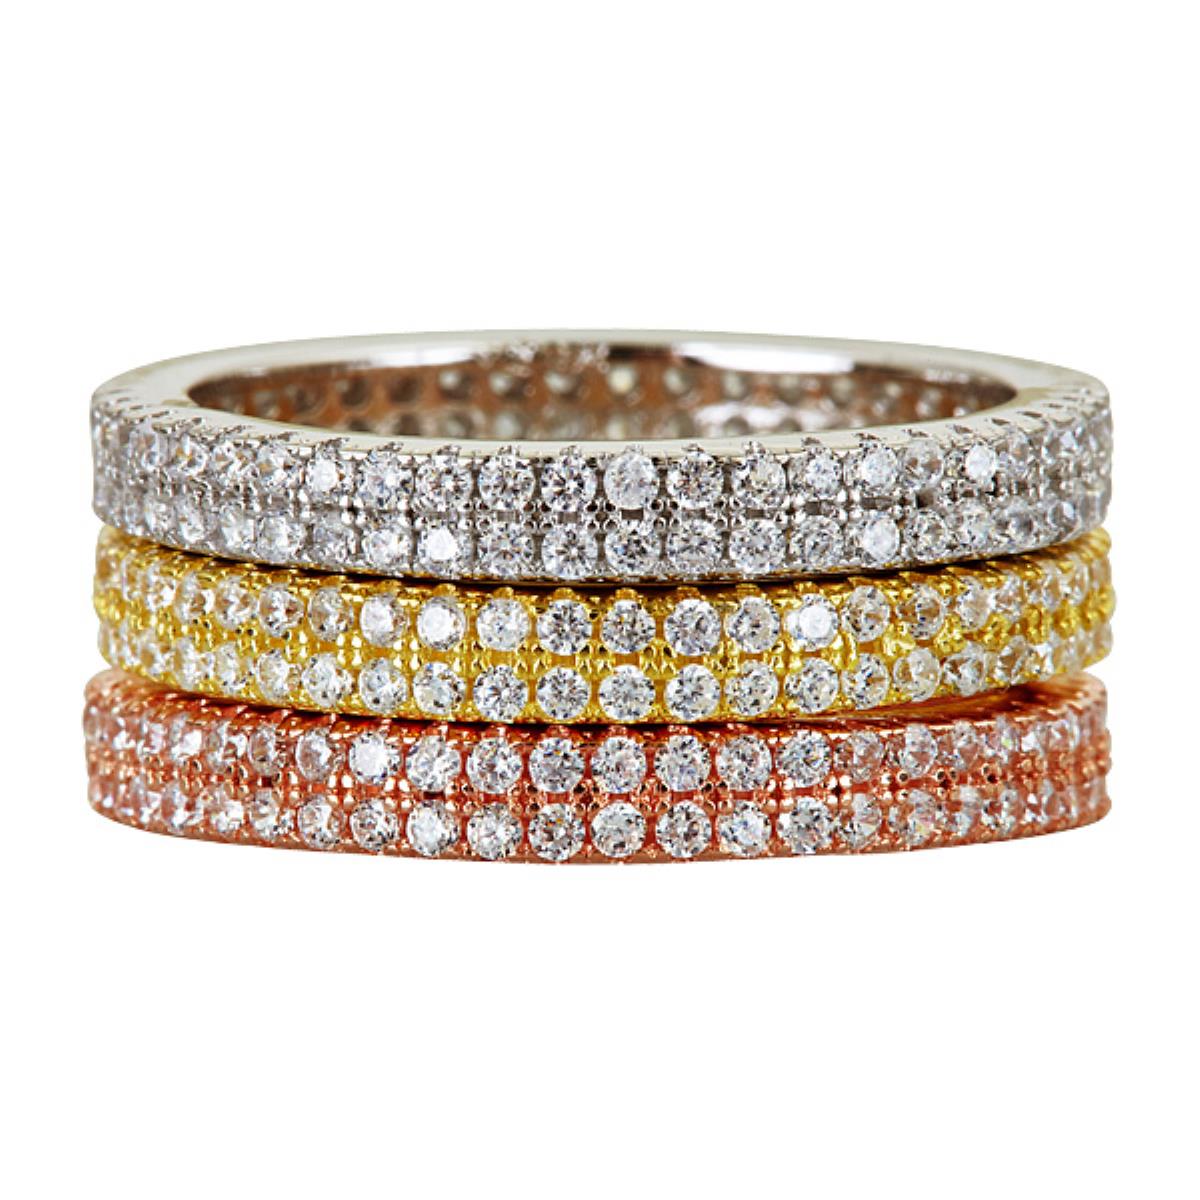 Sterling Silver Tricolor  10mm 2 Row Pave Stack Ring